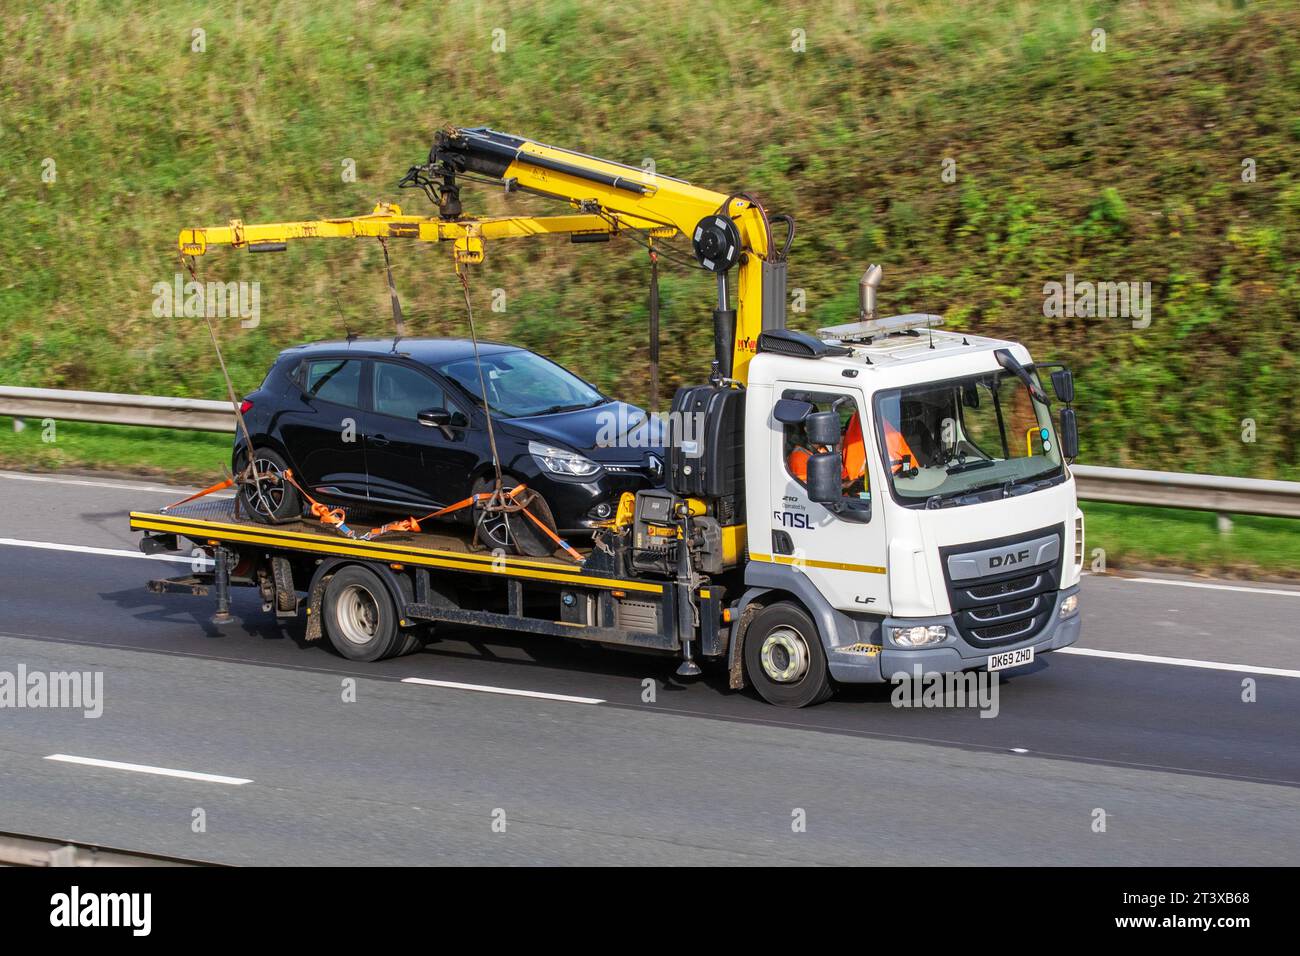 Hyrax ht-162 car lifter 6 tm capacity crane truck-mounted articulated cranes. Car lift fitted to NSL Services Ltd.  National Wheelclamping Contractor on behalf of the Driver and Vehicle Licensing Agency (DVLA) to enforce against non-compliant vehicles; Stock Photo